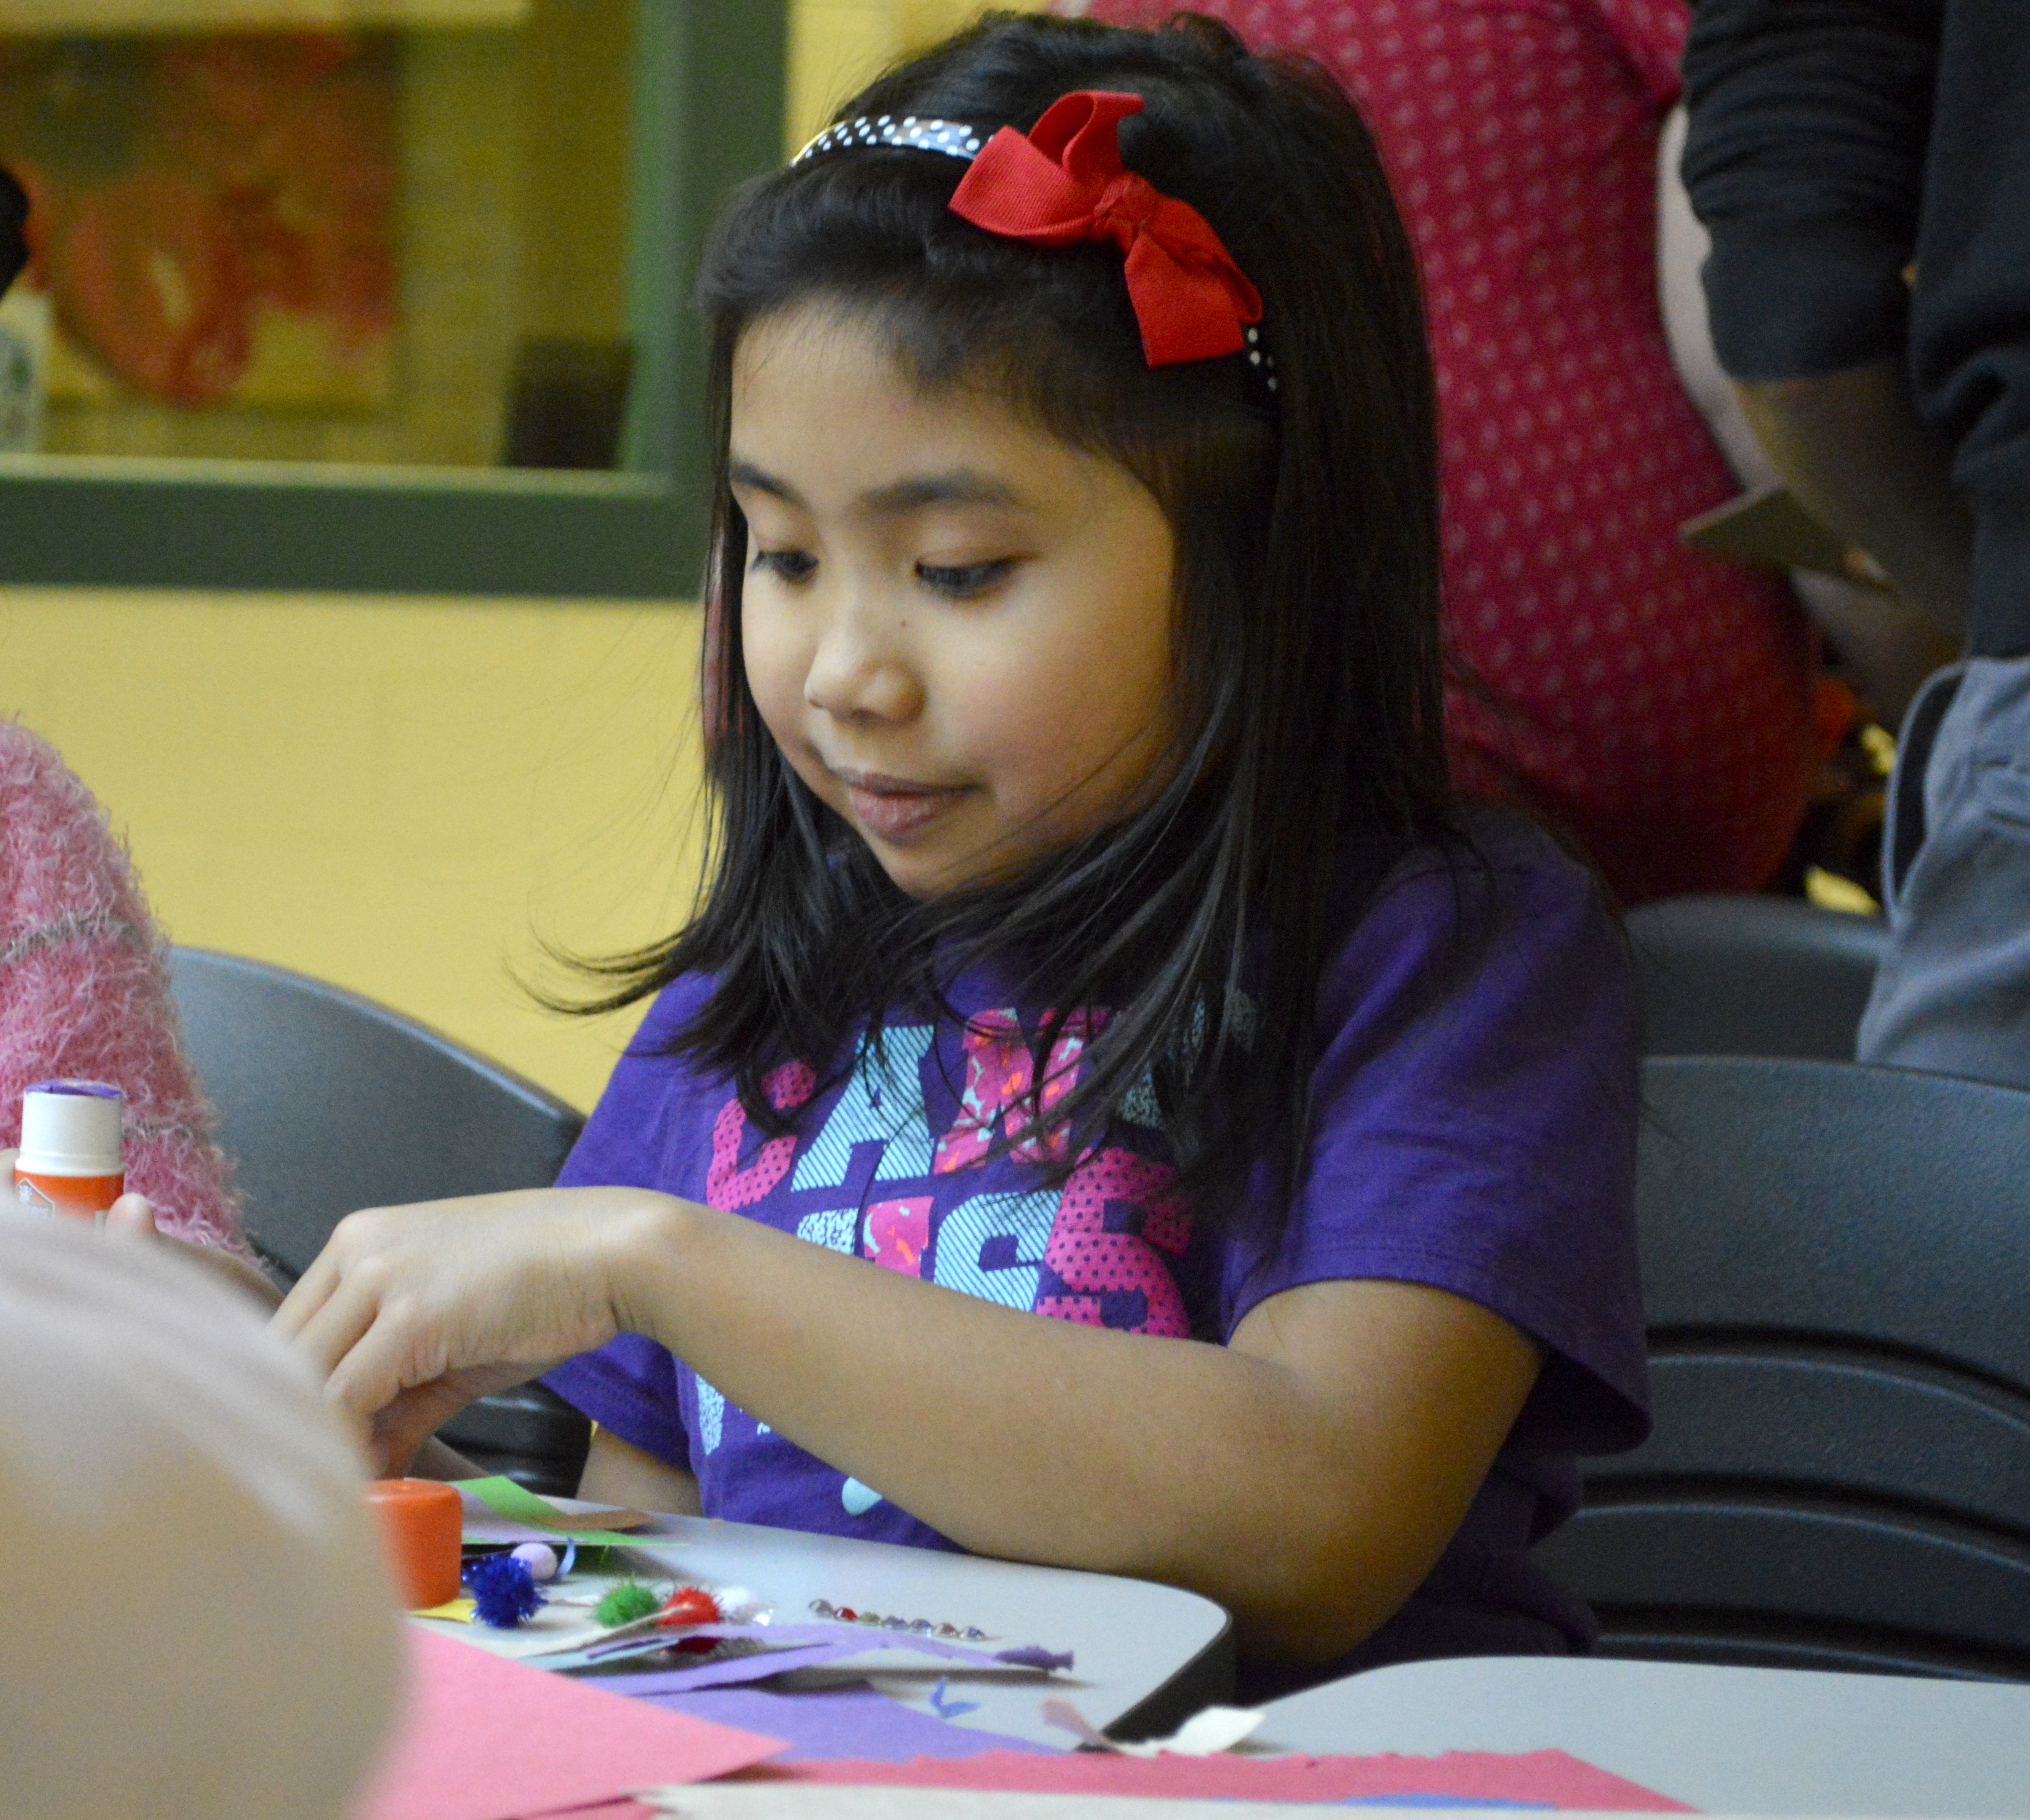 FIRST CHRISTMAS - Grade 3 student Paulene Manlapaz was making crafts at St. Patrick’s Community School on Wednesday. Manlapaz is from the Philippines and is celebrating her first Christmas in Canada.